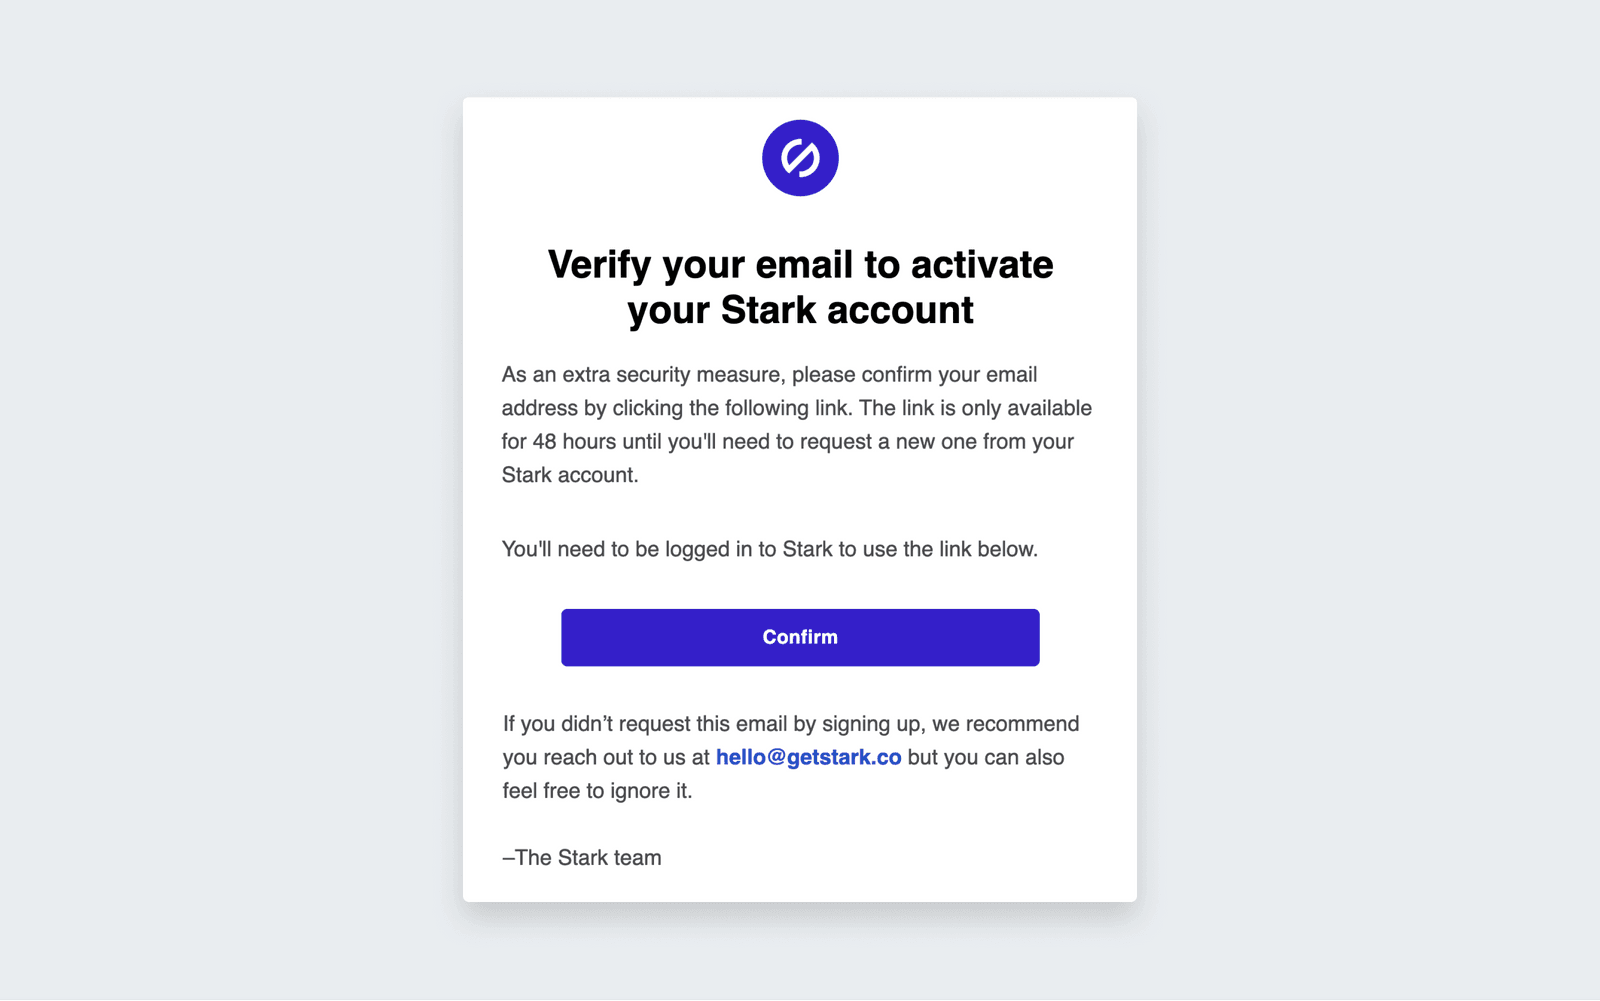 Screenshot of the verification email sent from Stark